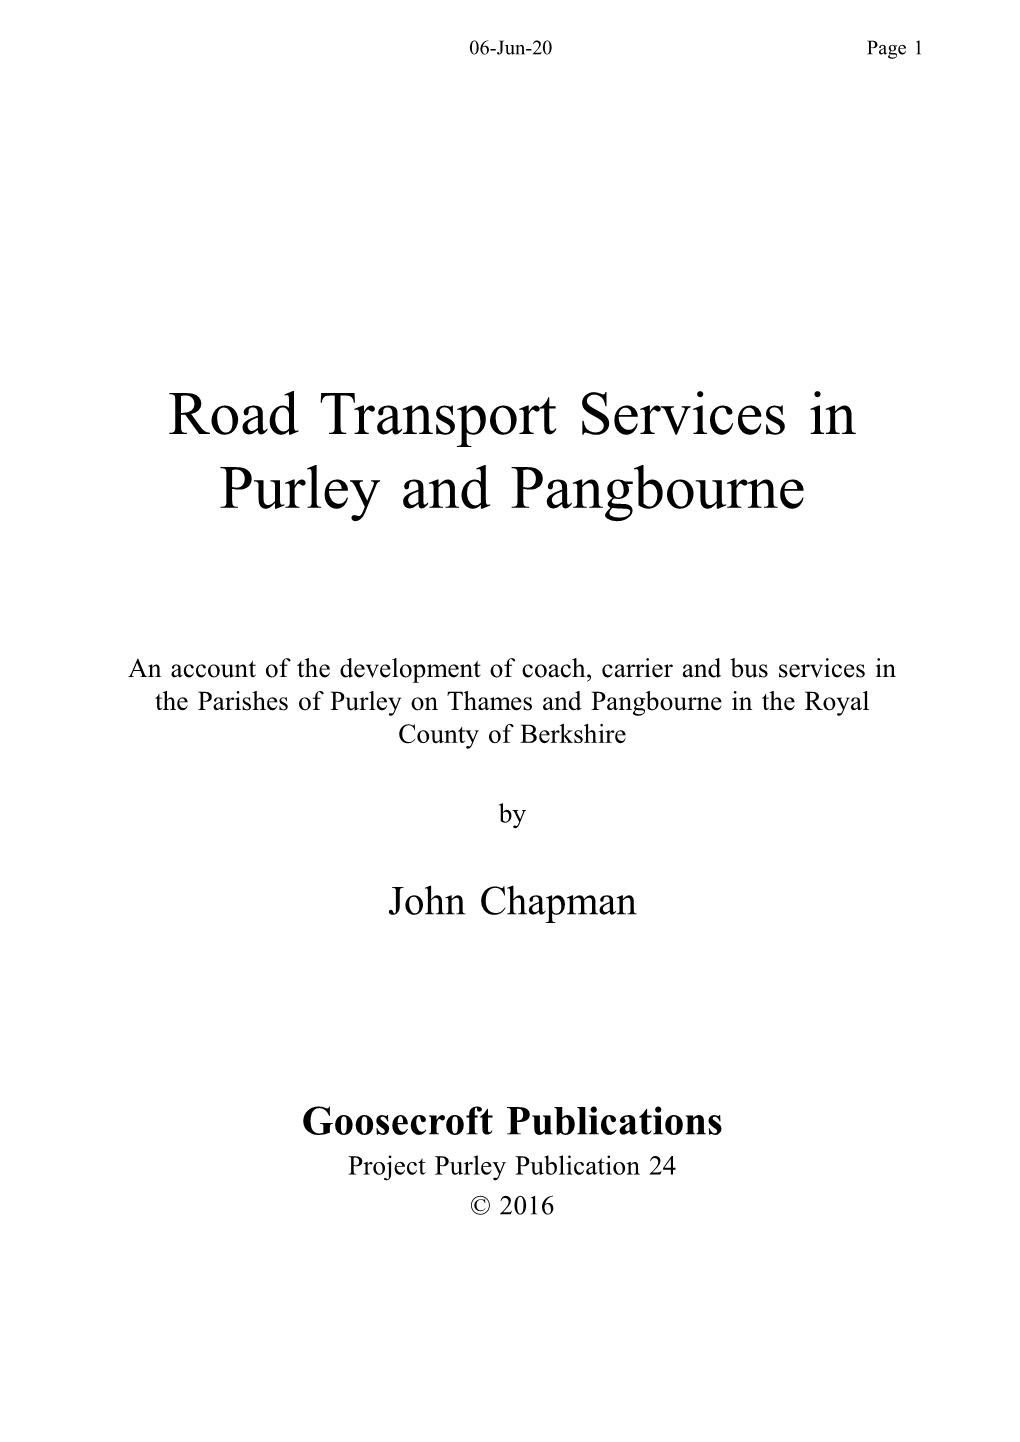 Road Transport Services in Purley and Pangbourne